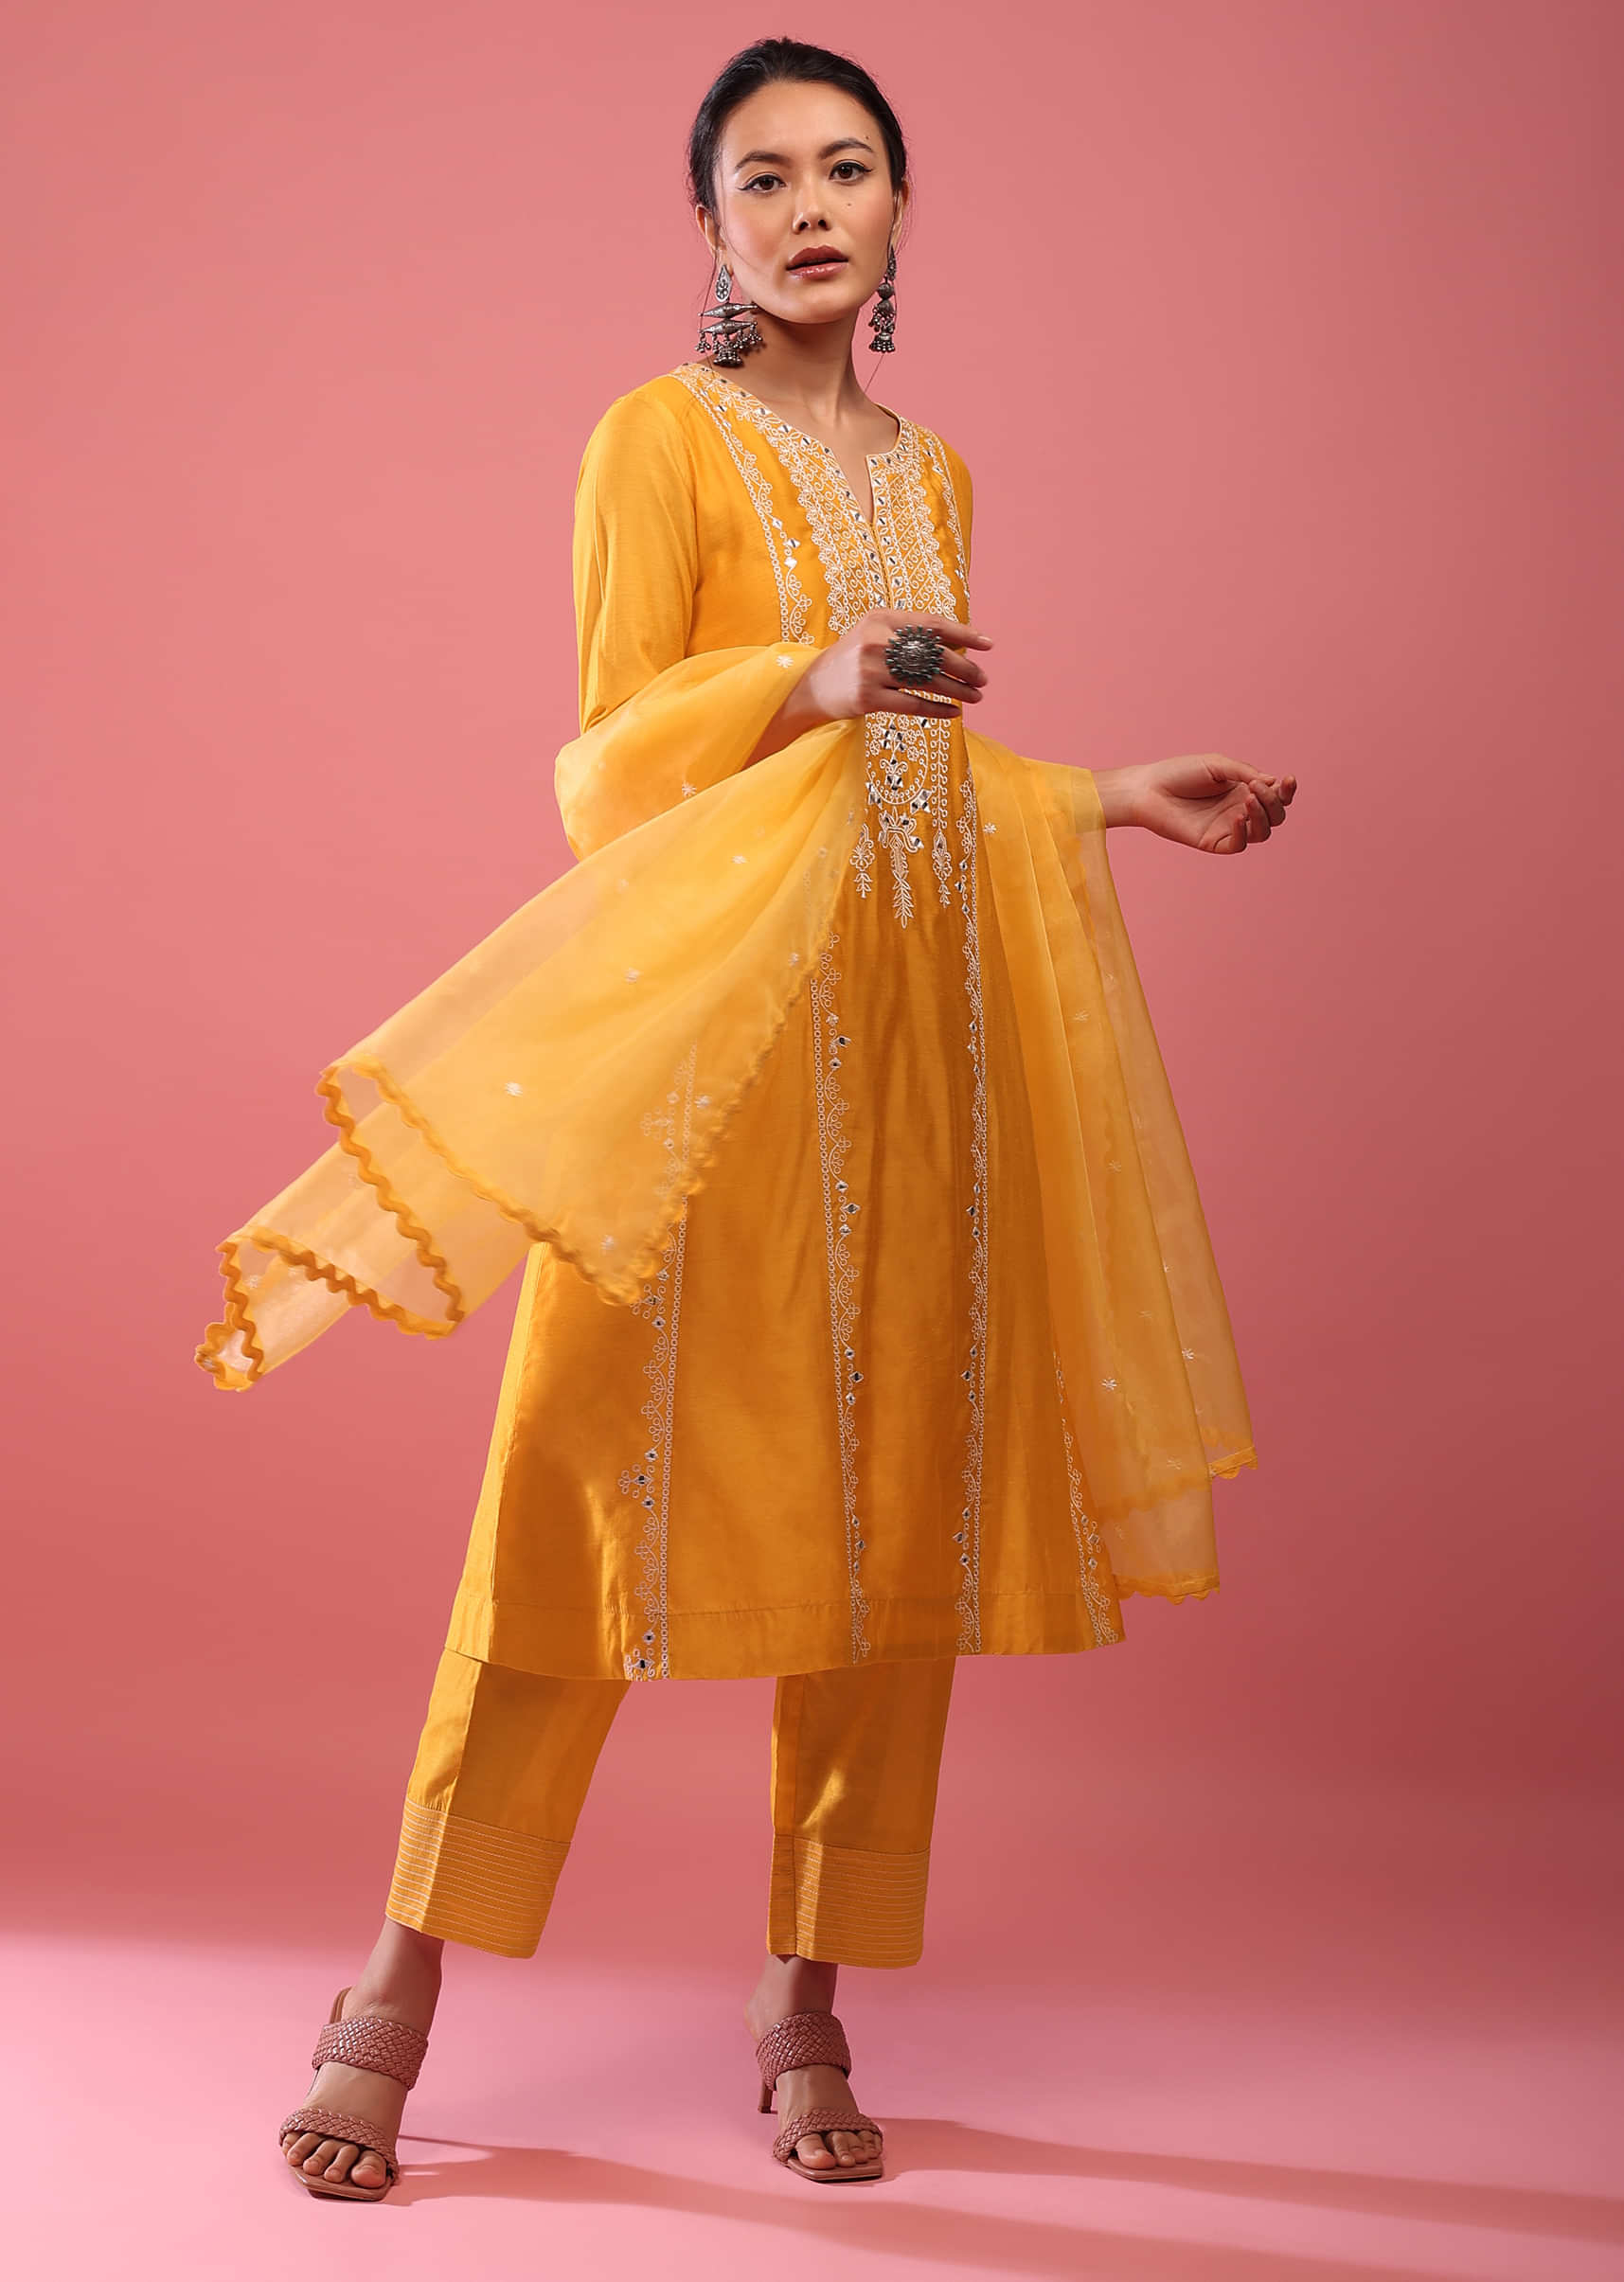 Chrome Yellow Pant Suit Set In Lucknowi Abla Embroidery With Mirror And Organza Dupatta